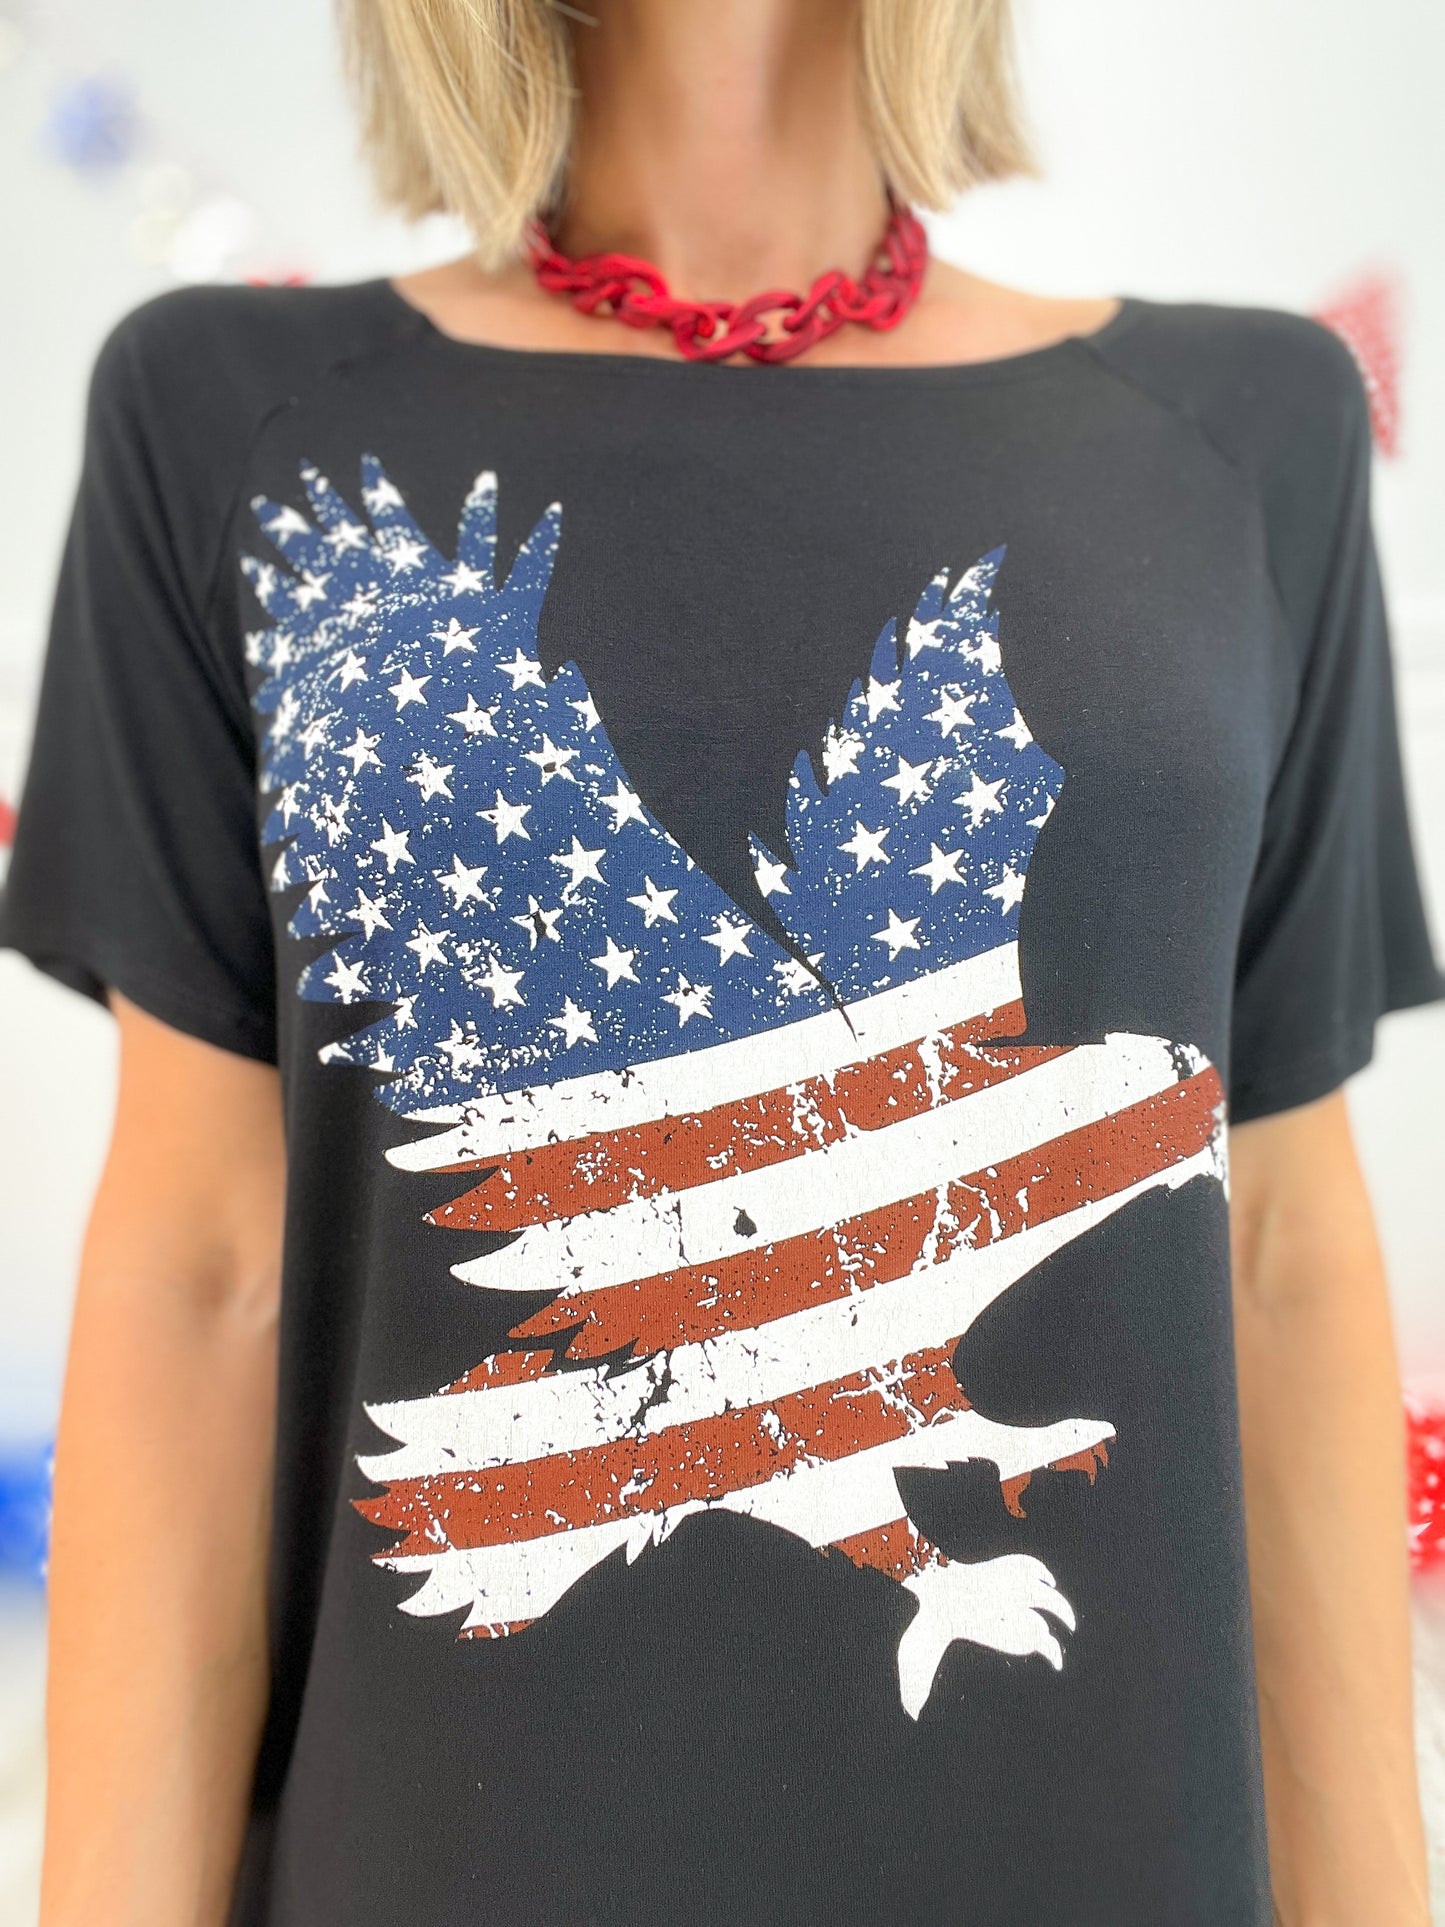 RAYON SPAN KNIT TOP WITH AMERCIAN FLAG EAGLE GRAPHIC